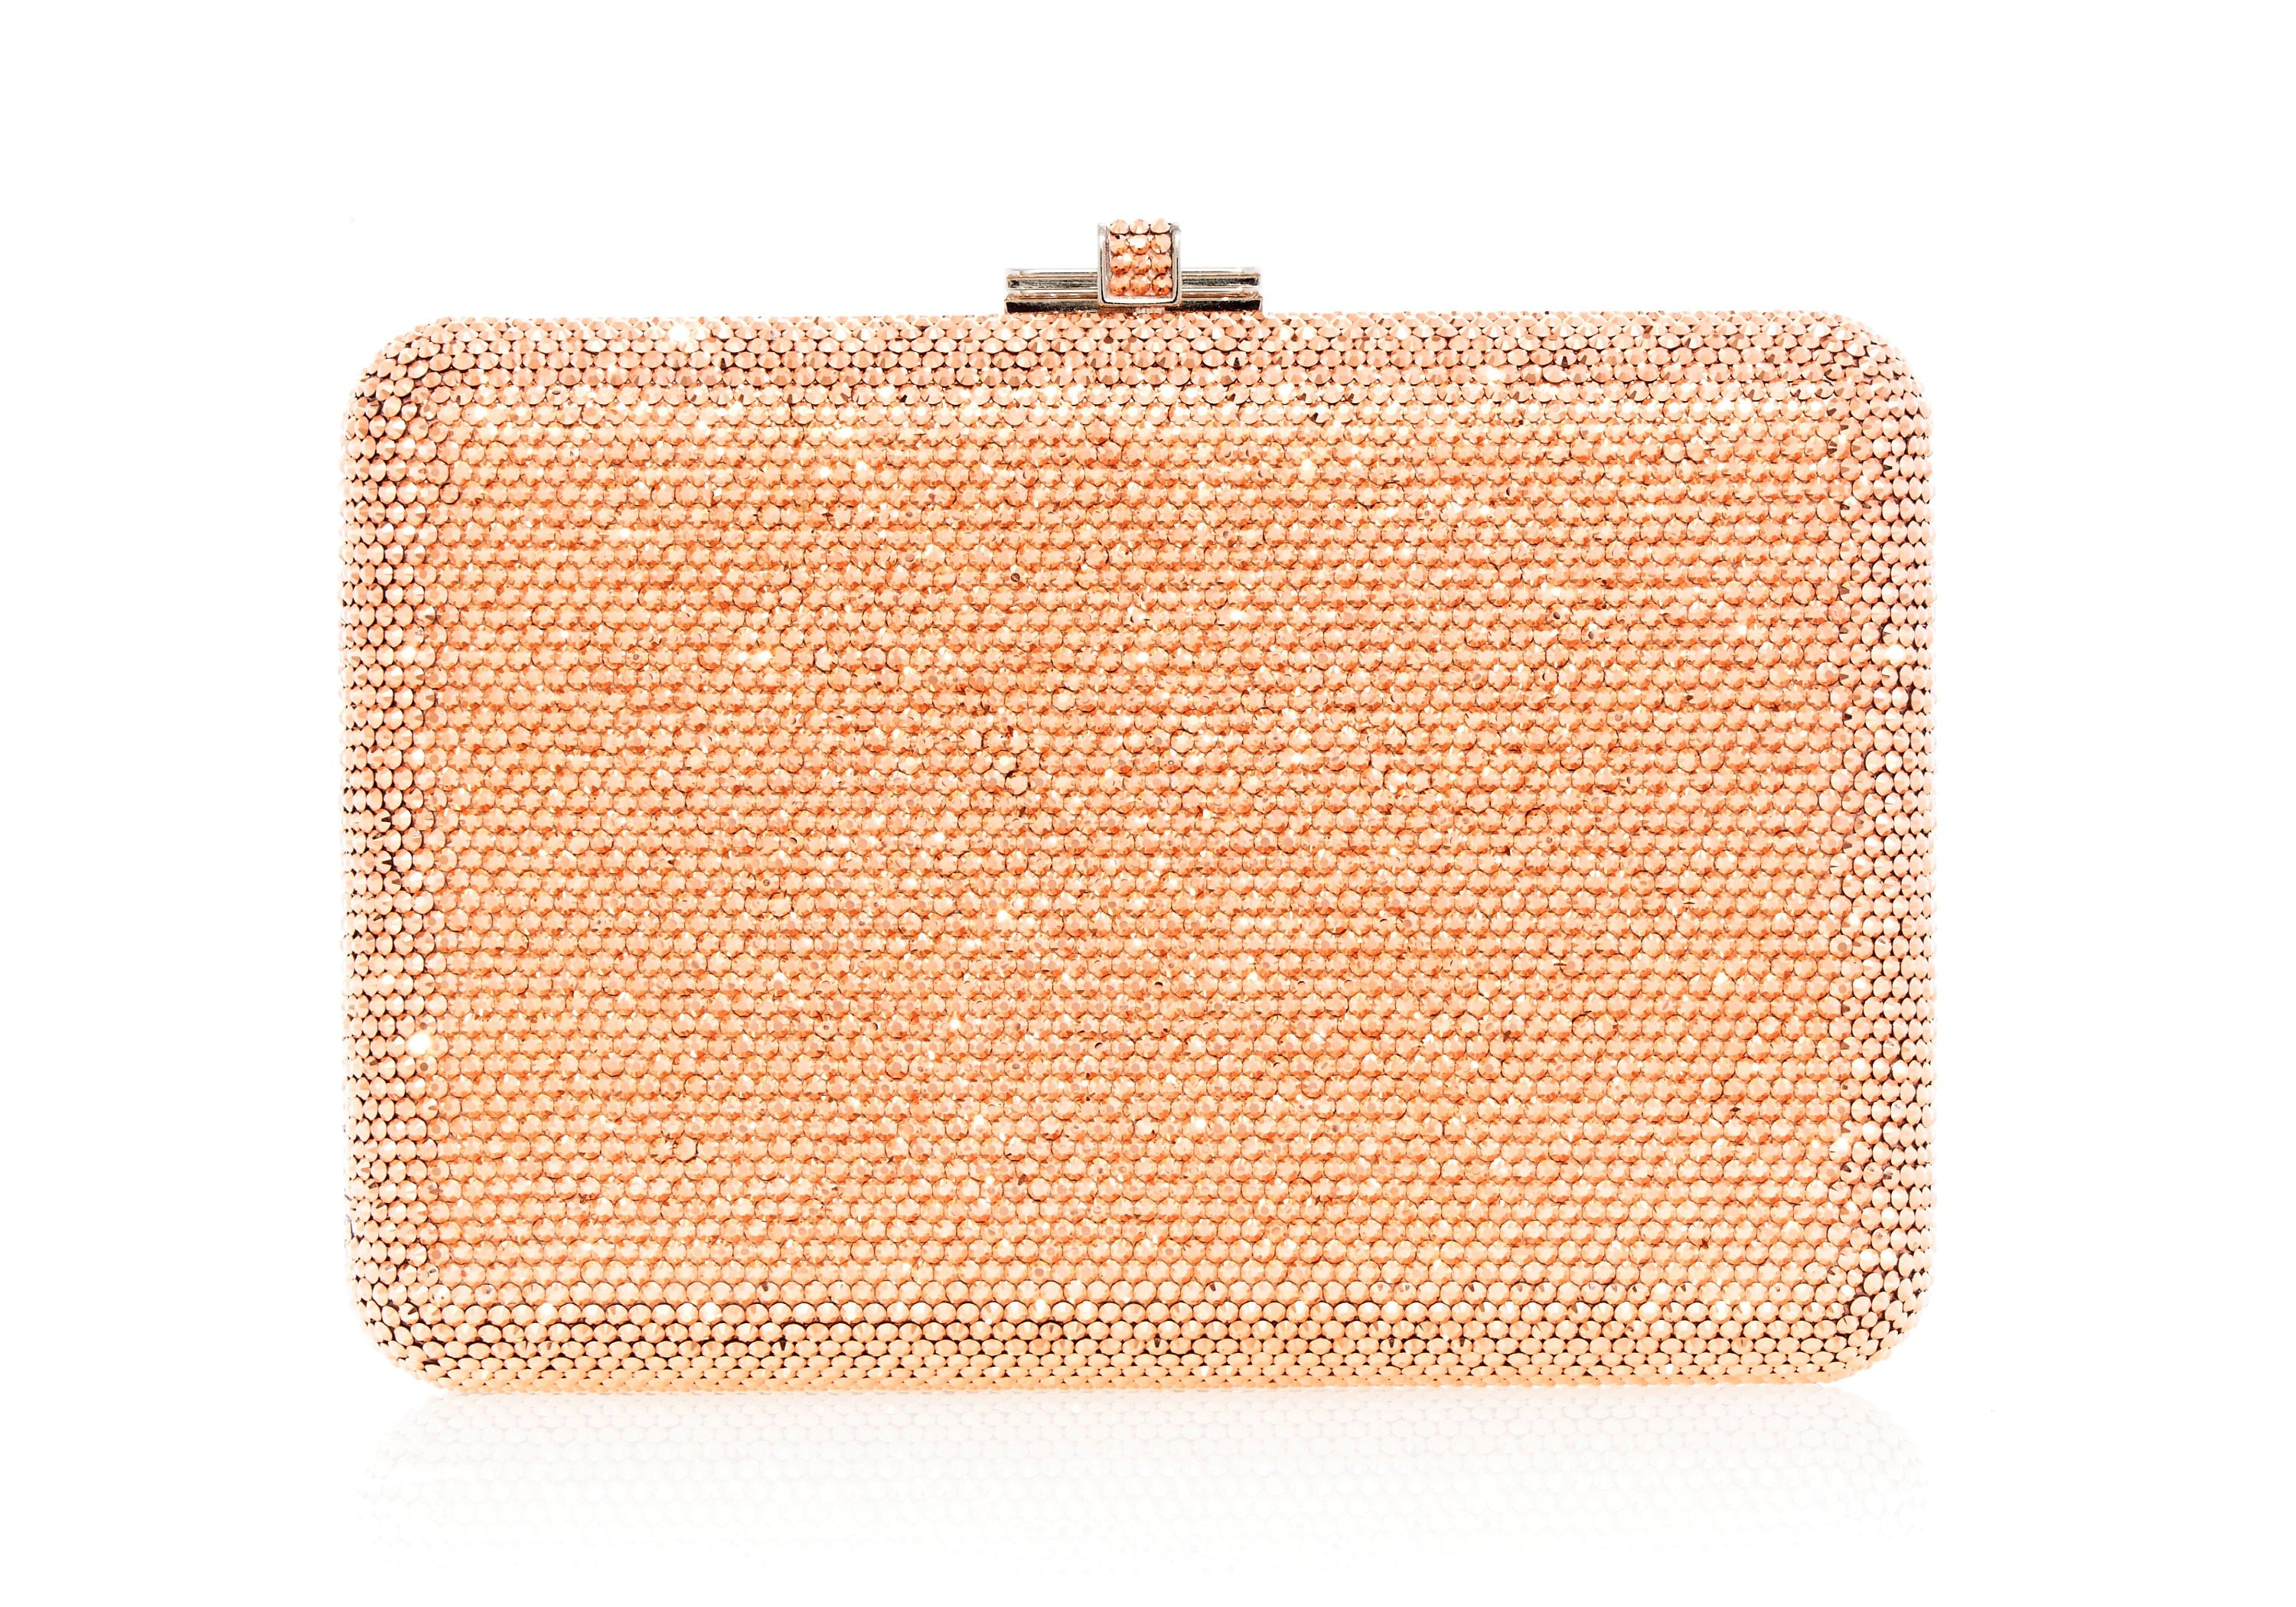 Judith Leiber Couture Women's Rose Crystal Clutch - Champagne